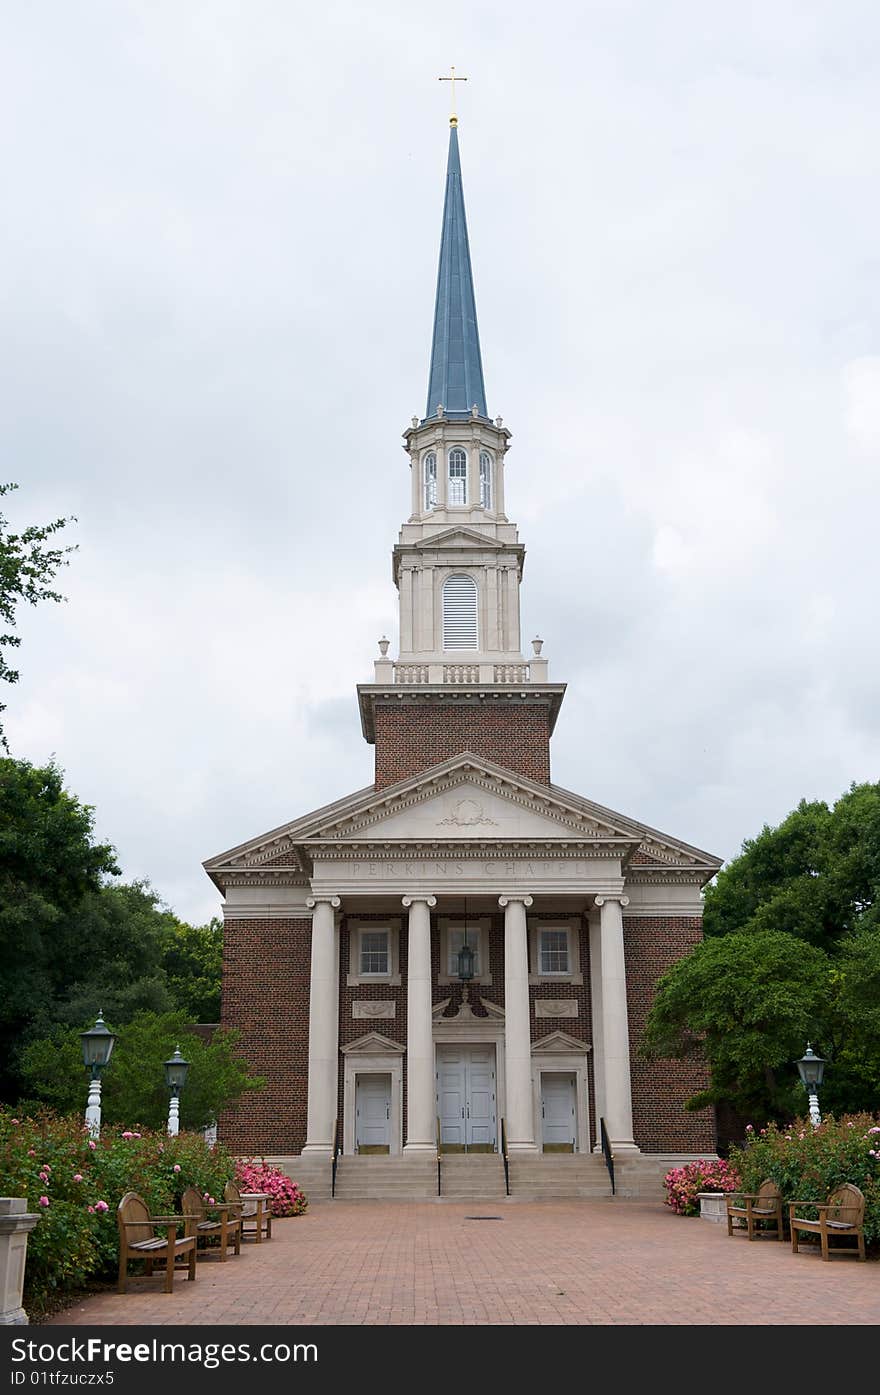 A southern church with a tall steeple. A southern church with a tall steeple